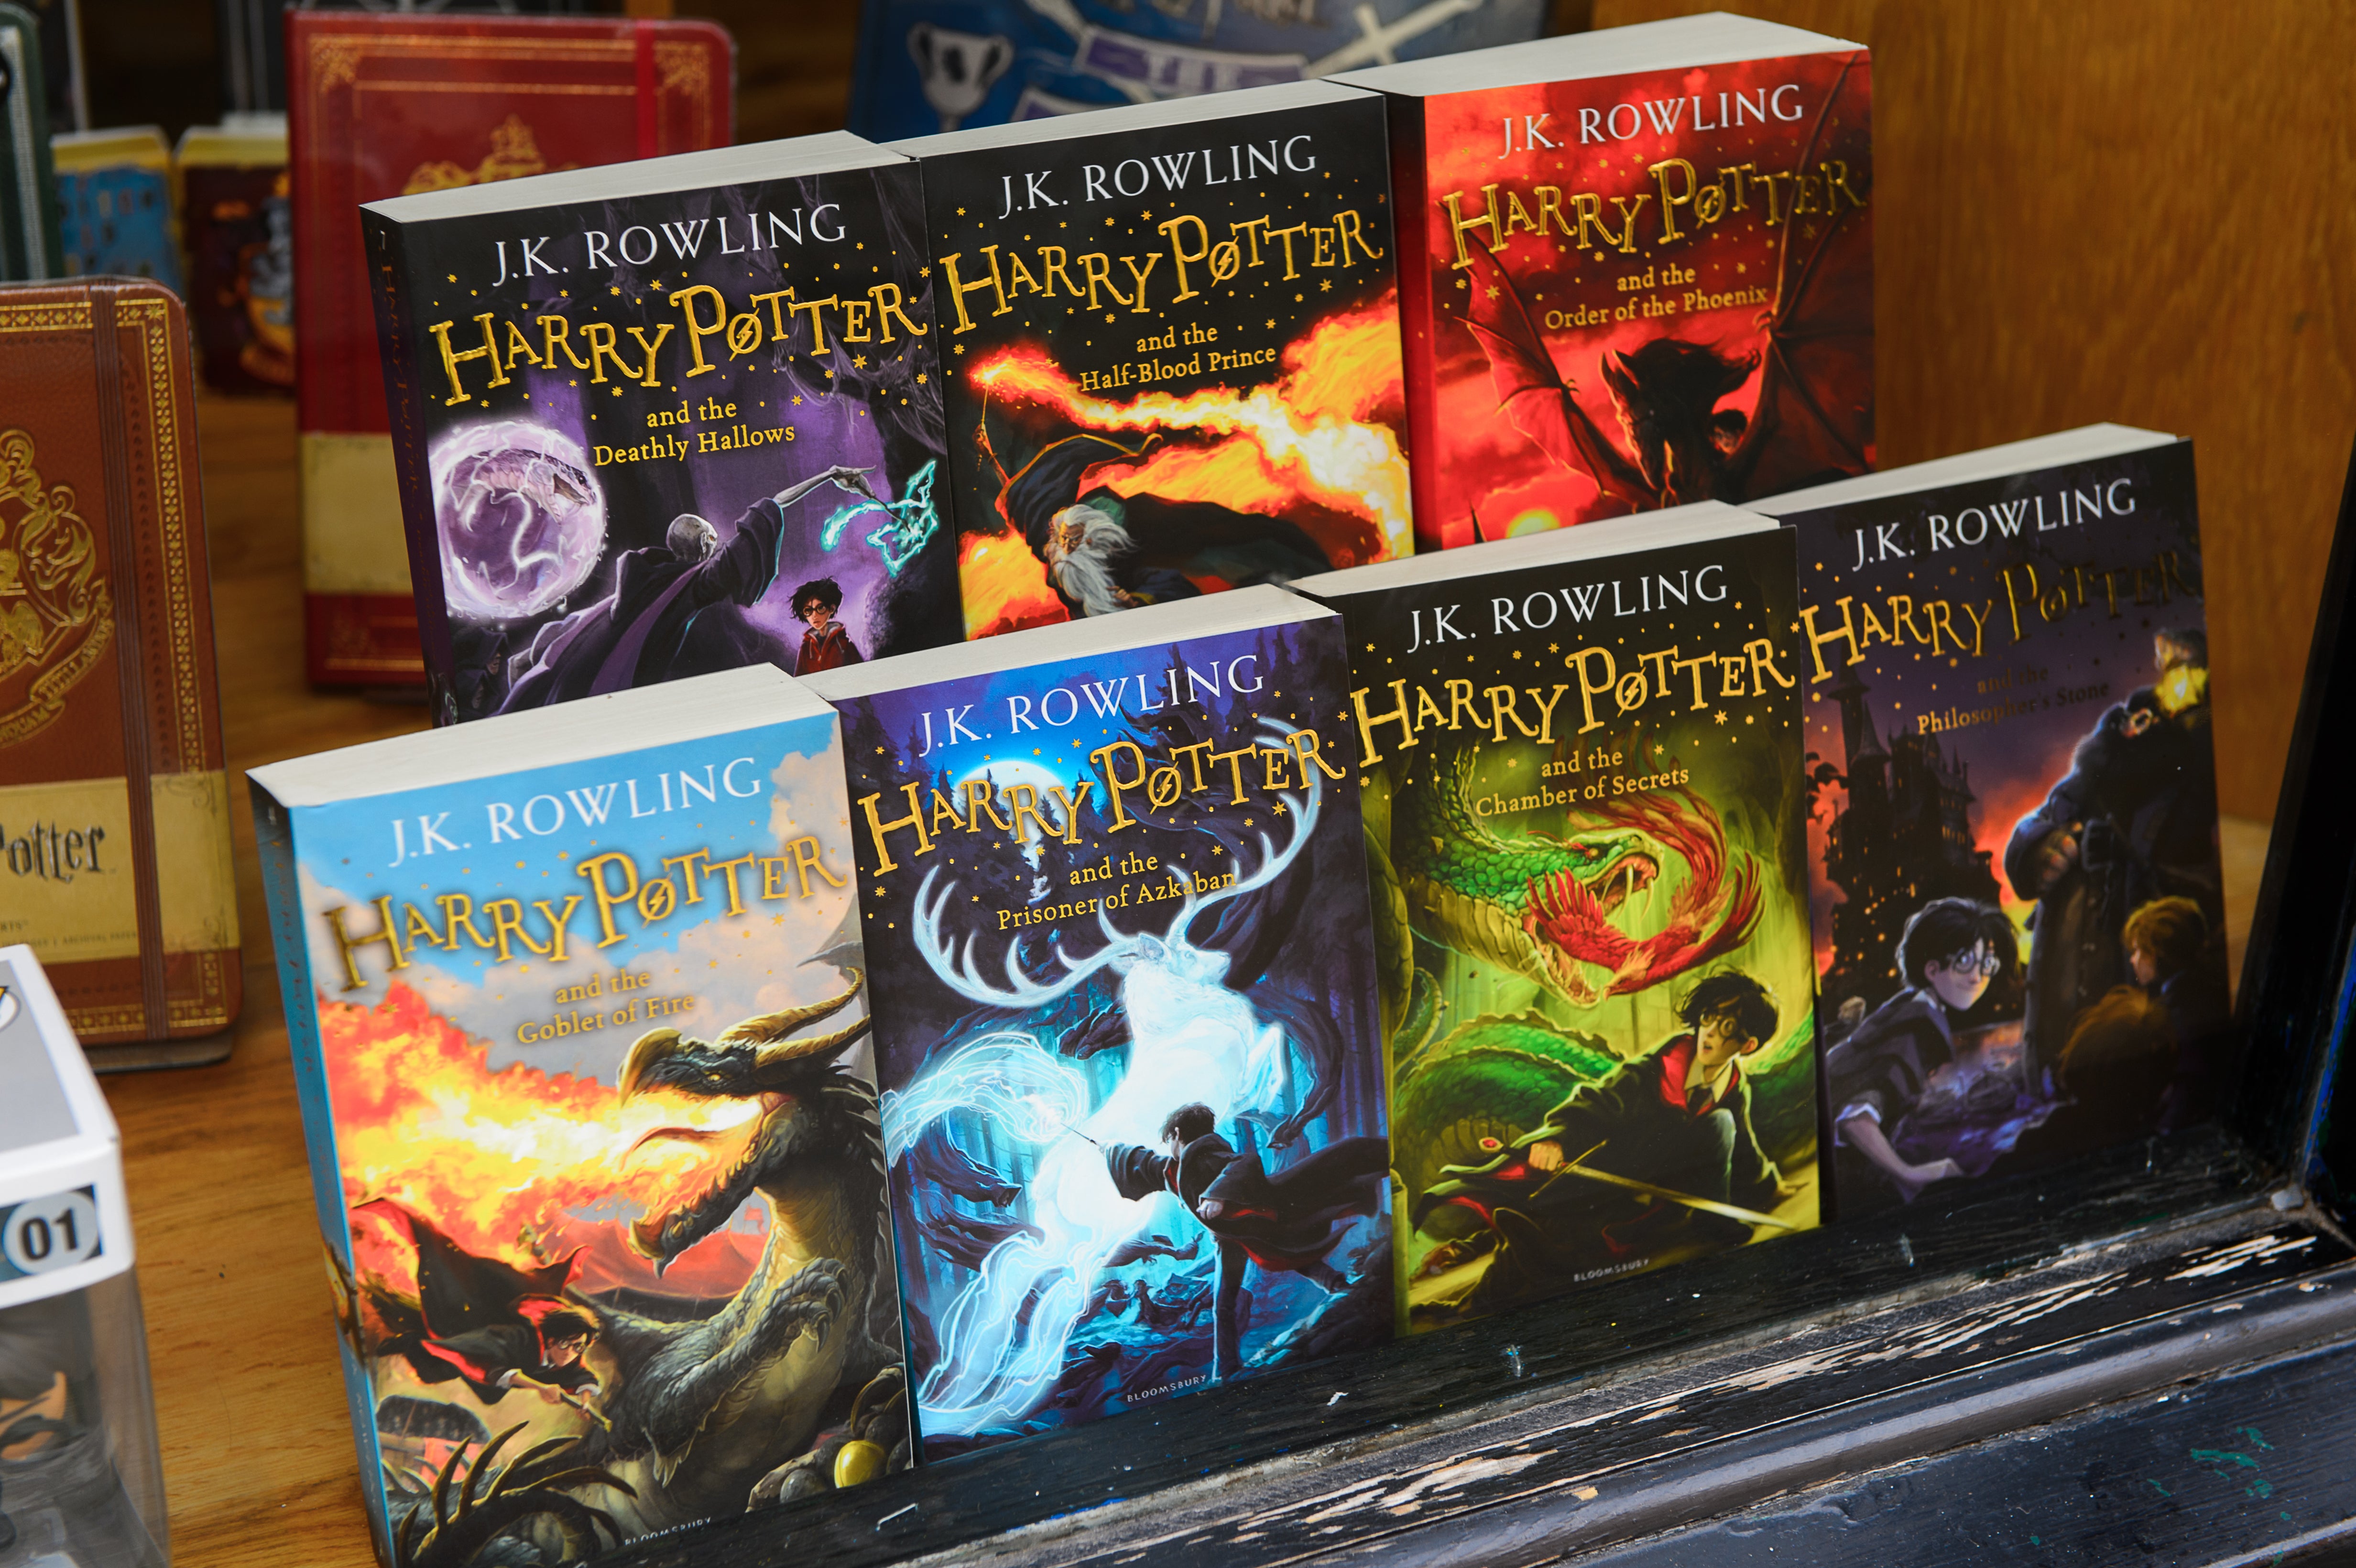 Books from the Harry Potter series.